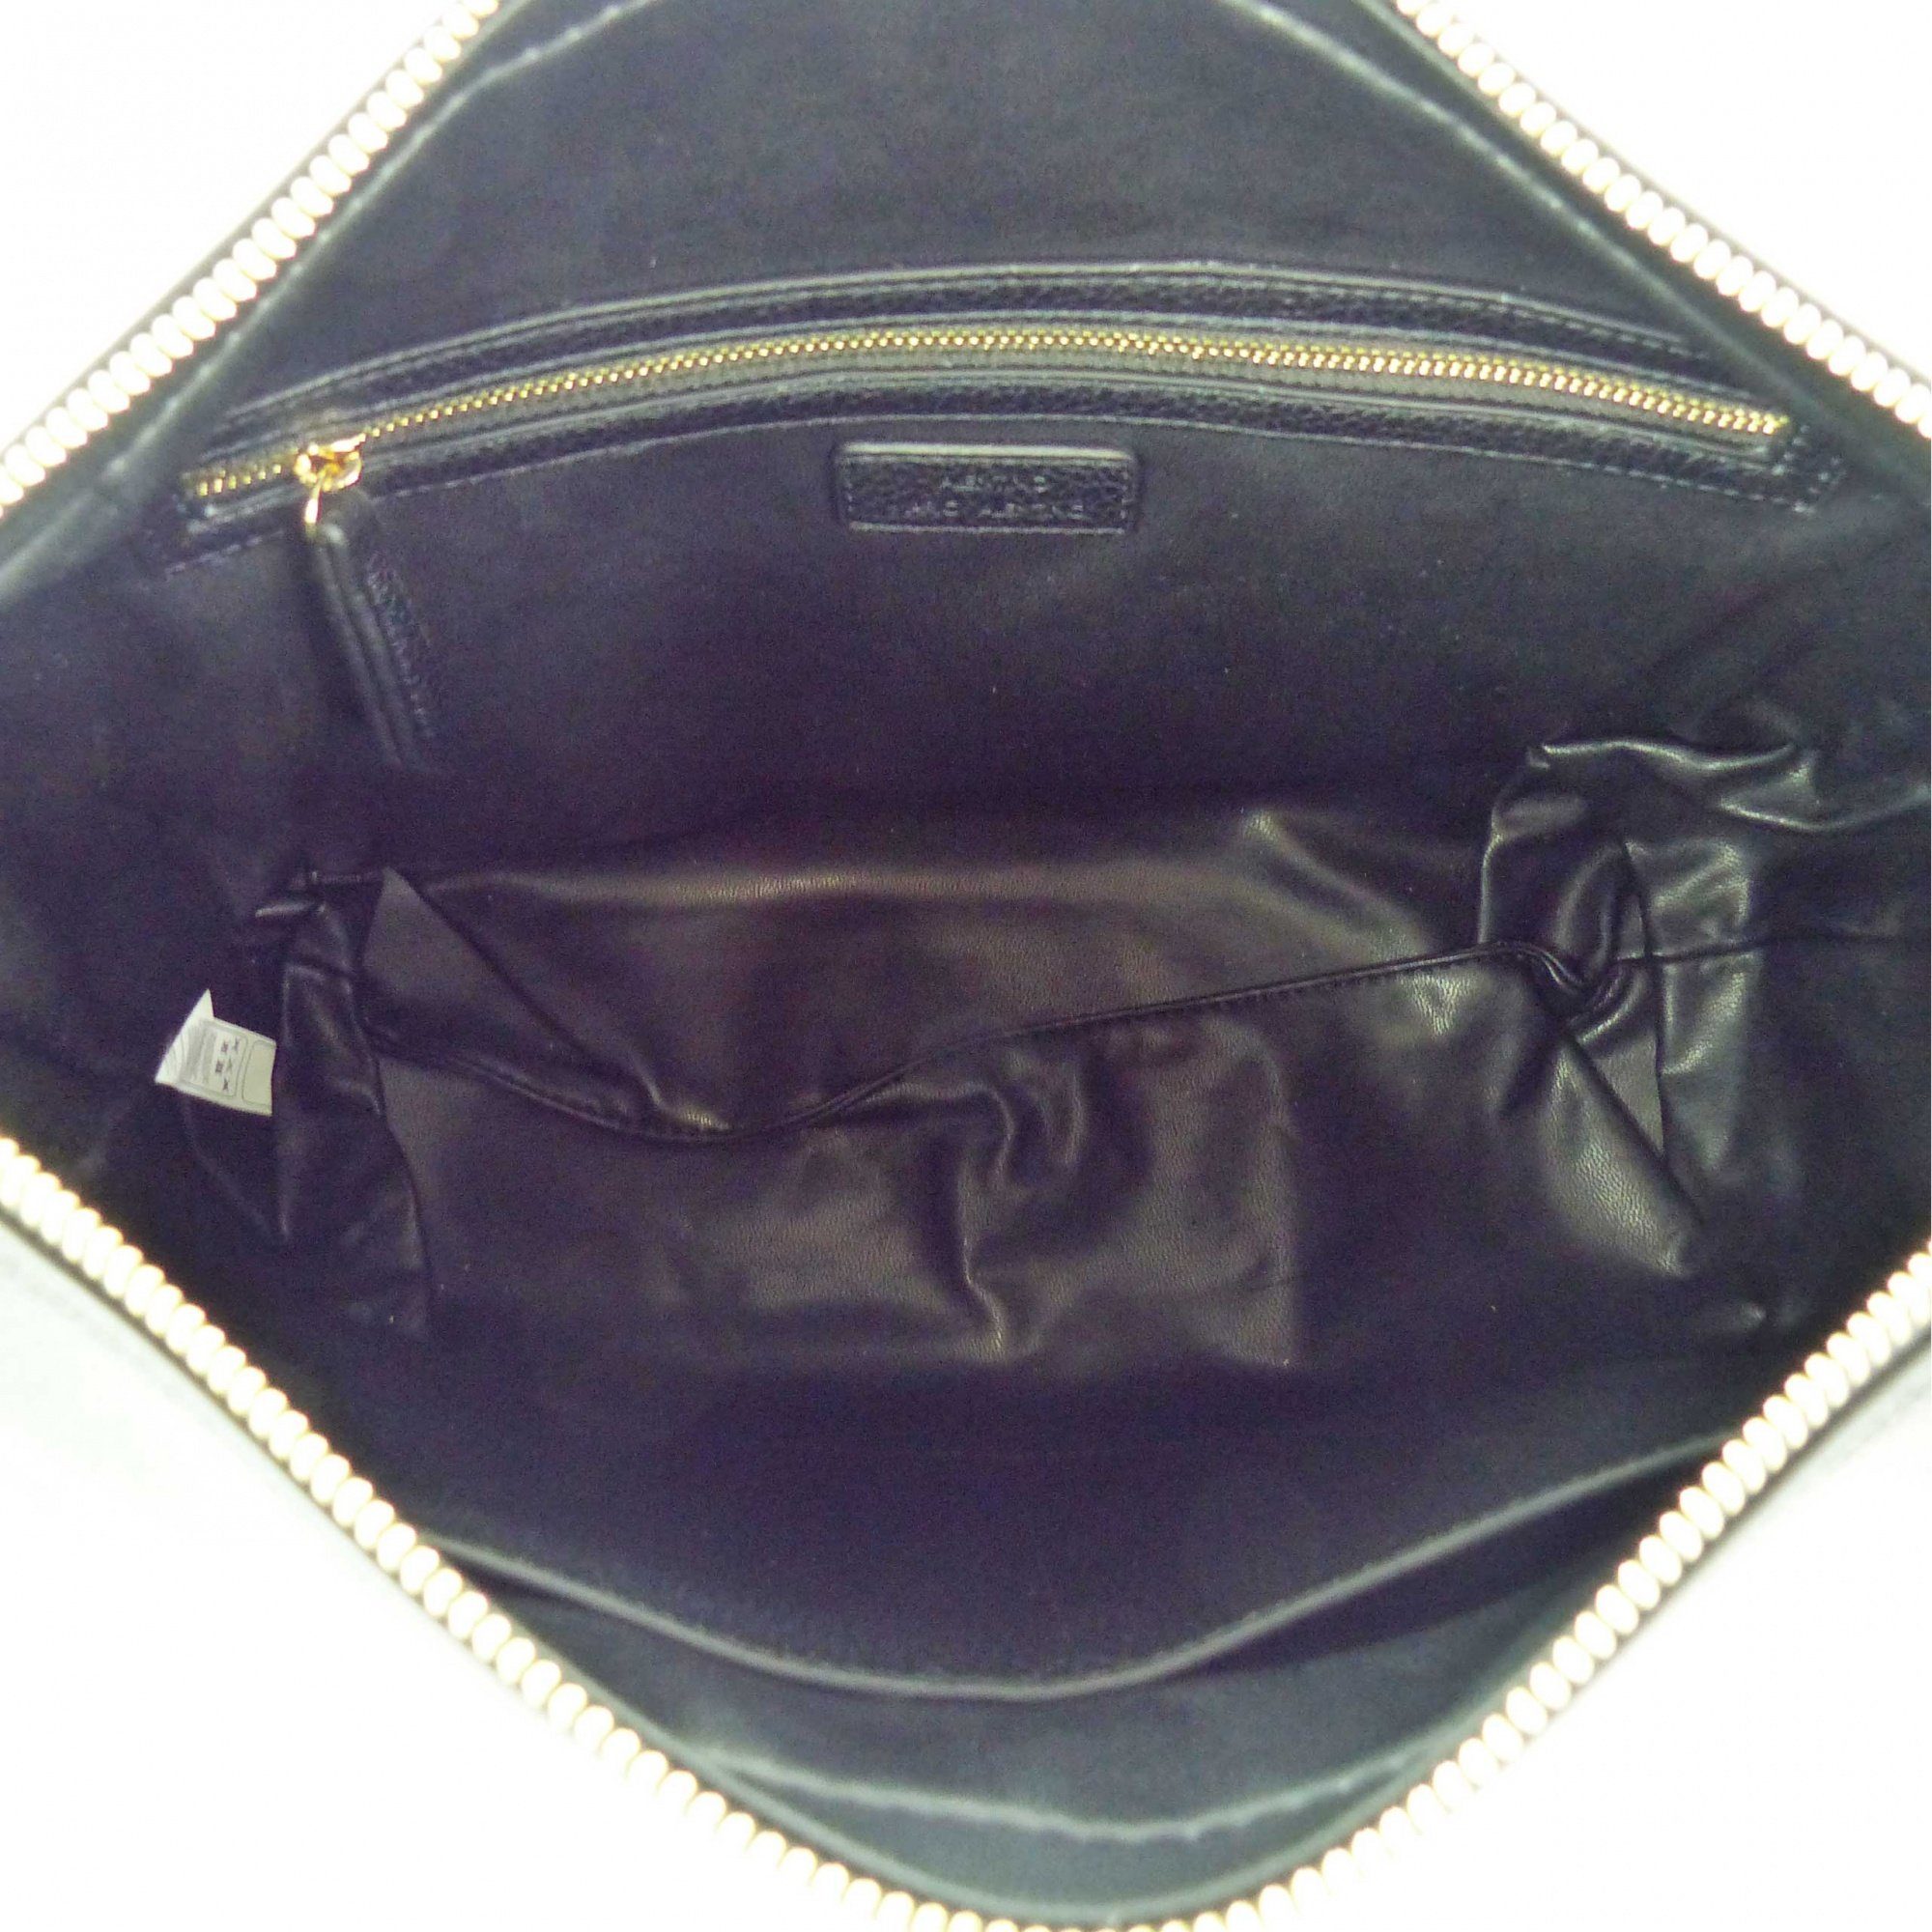 VALENTINO Nero Schultertasche VBS7GM02 BAGS Bag Hobo Megeve